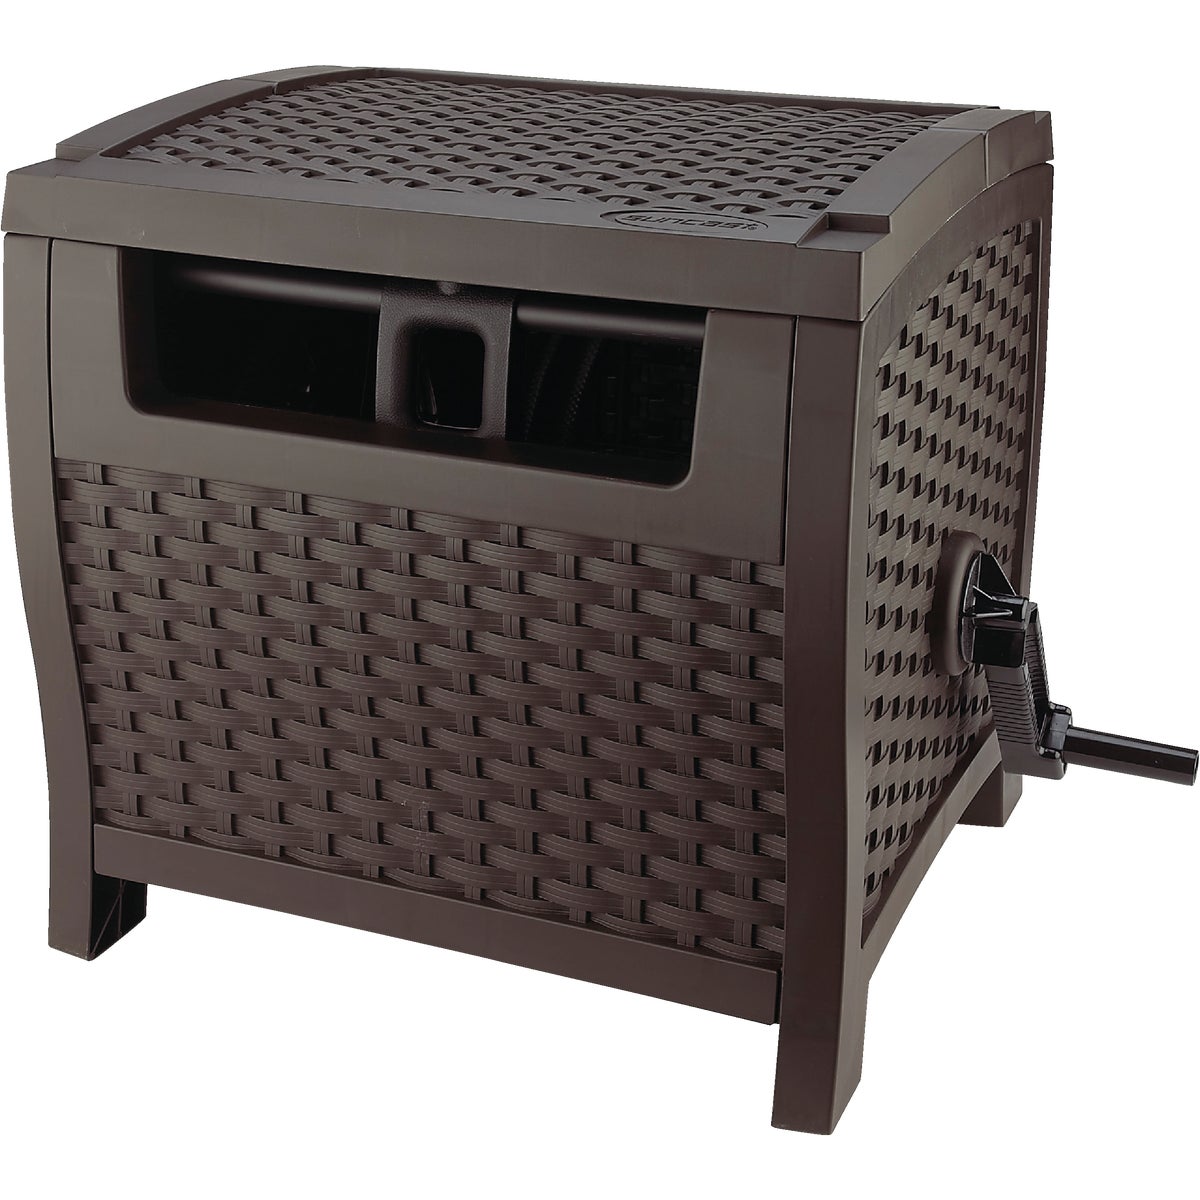 Item 705170, Durable contemporary wicker design conceals hose and reel.